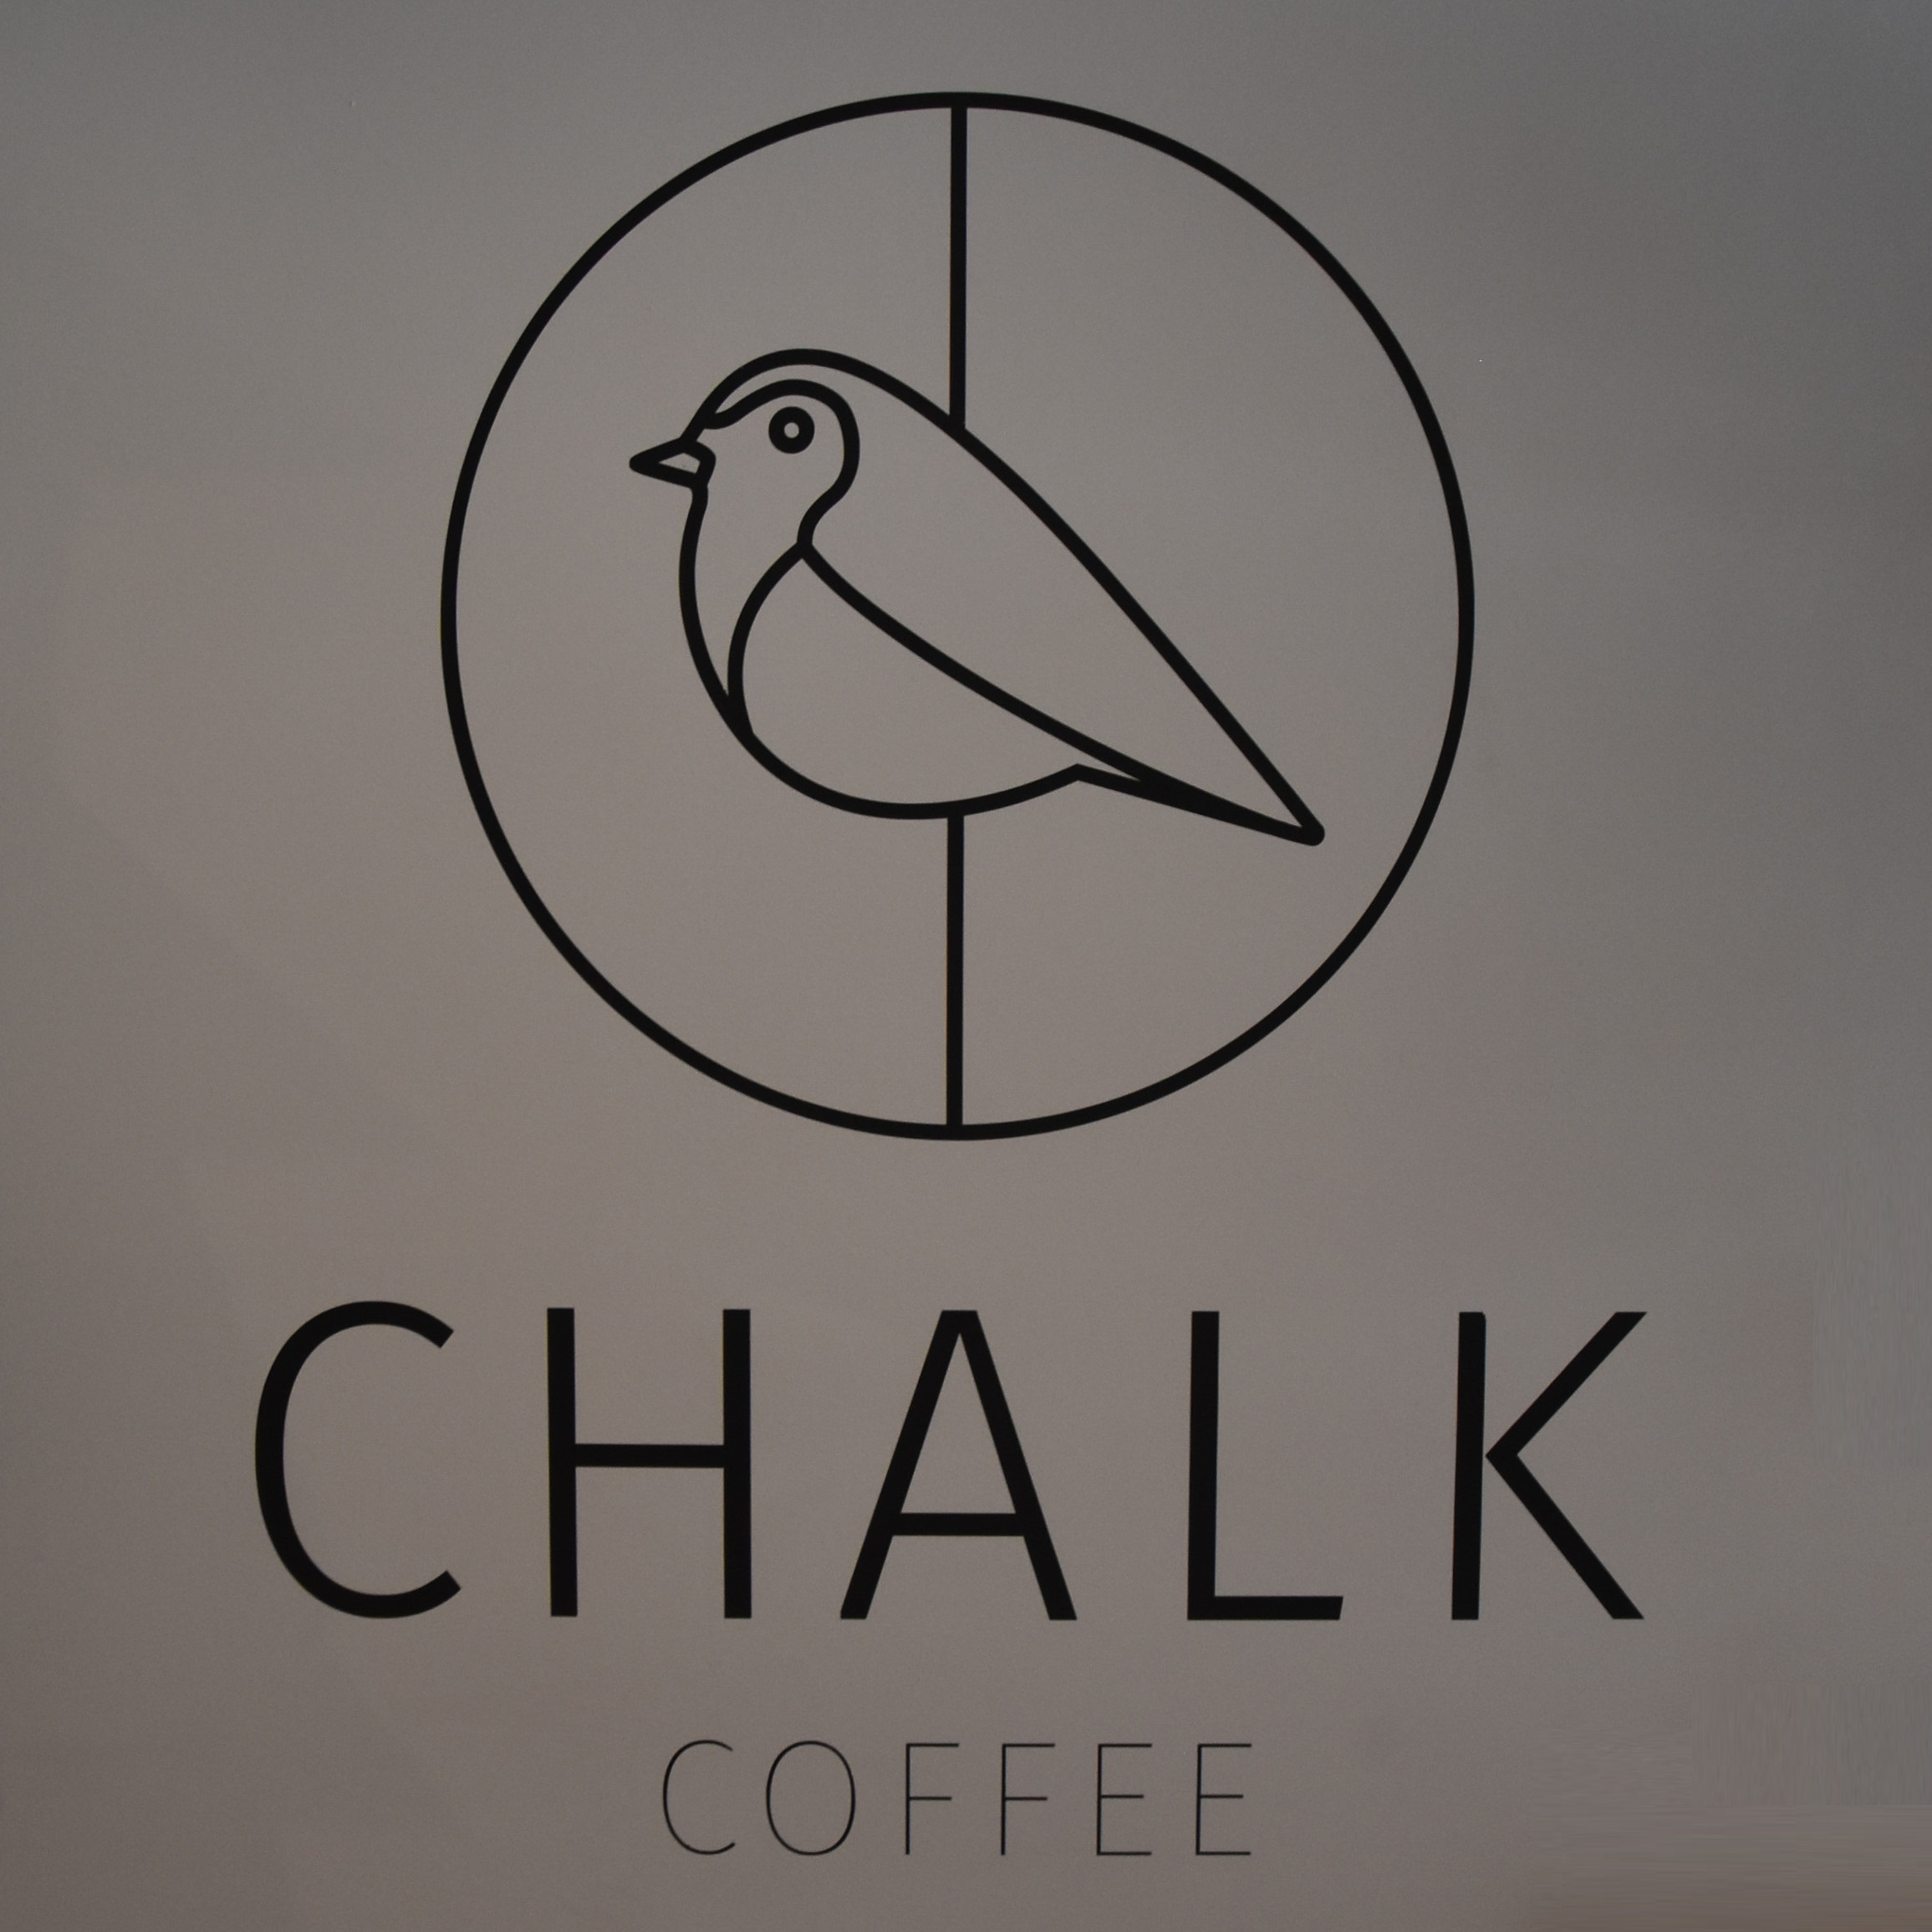 The Chalk Coffee logo from the wall of the coffee shop in Chester.